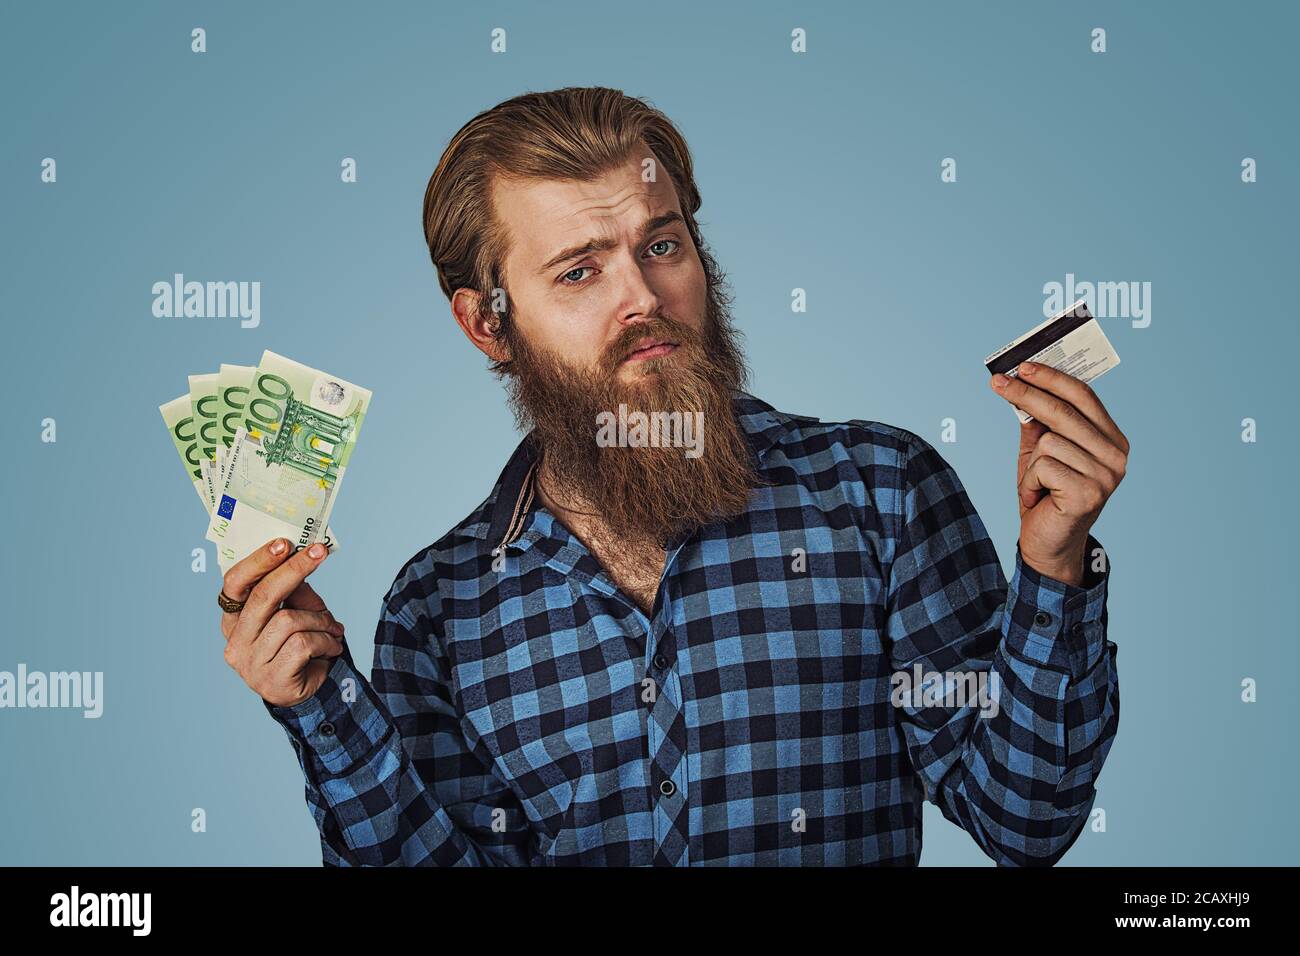 Businessman skeptical choosing holding showing plastic credit card or money cash euro banknotes bills Bearded hipster business man Isolated on blue Ba Stock Photo